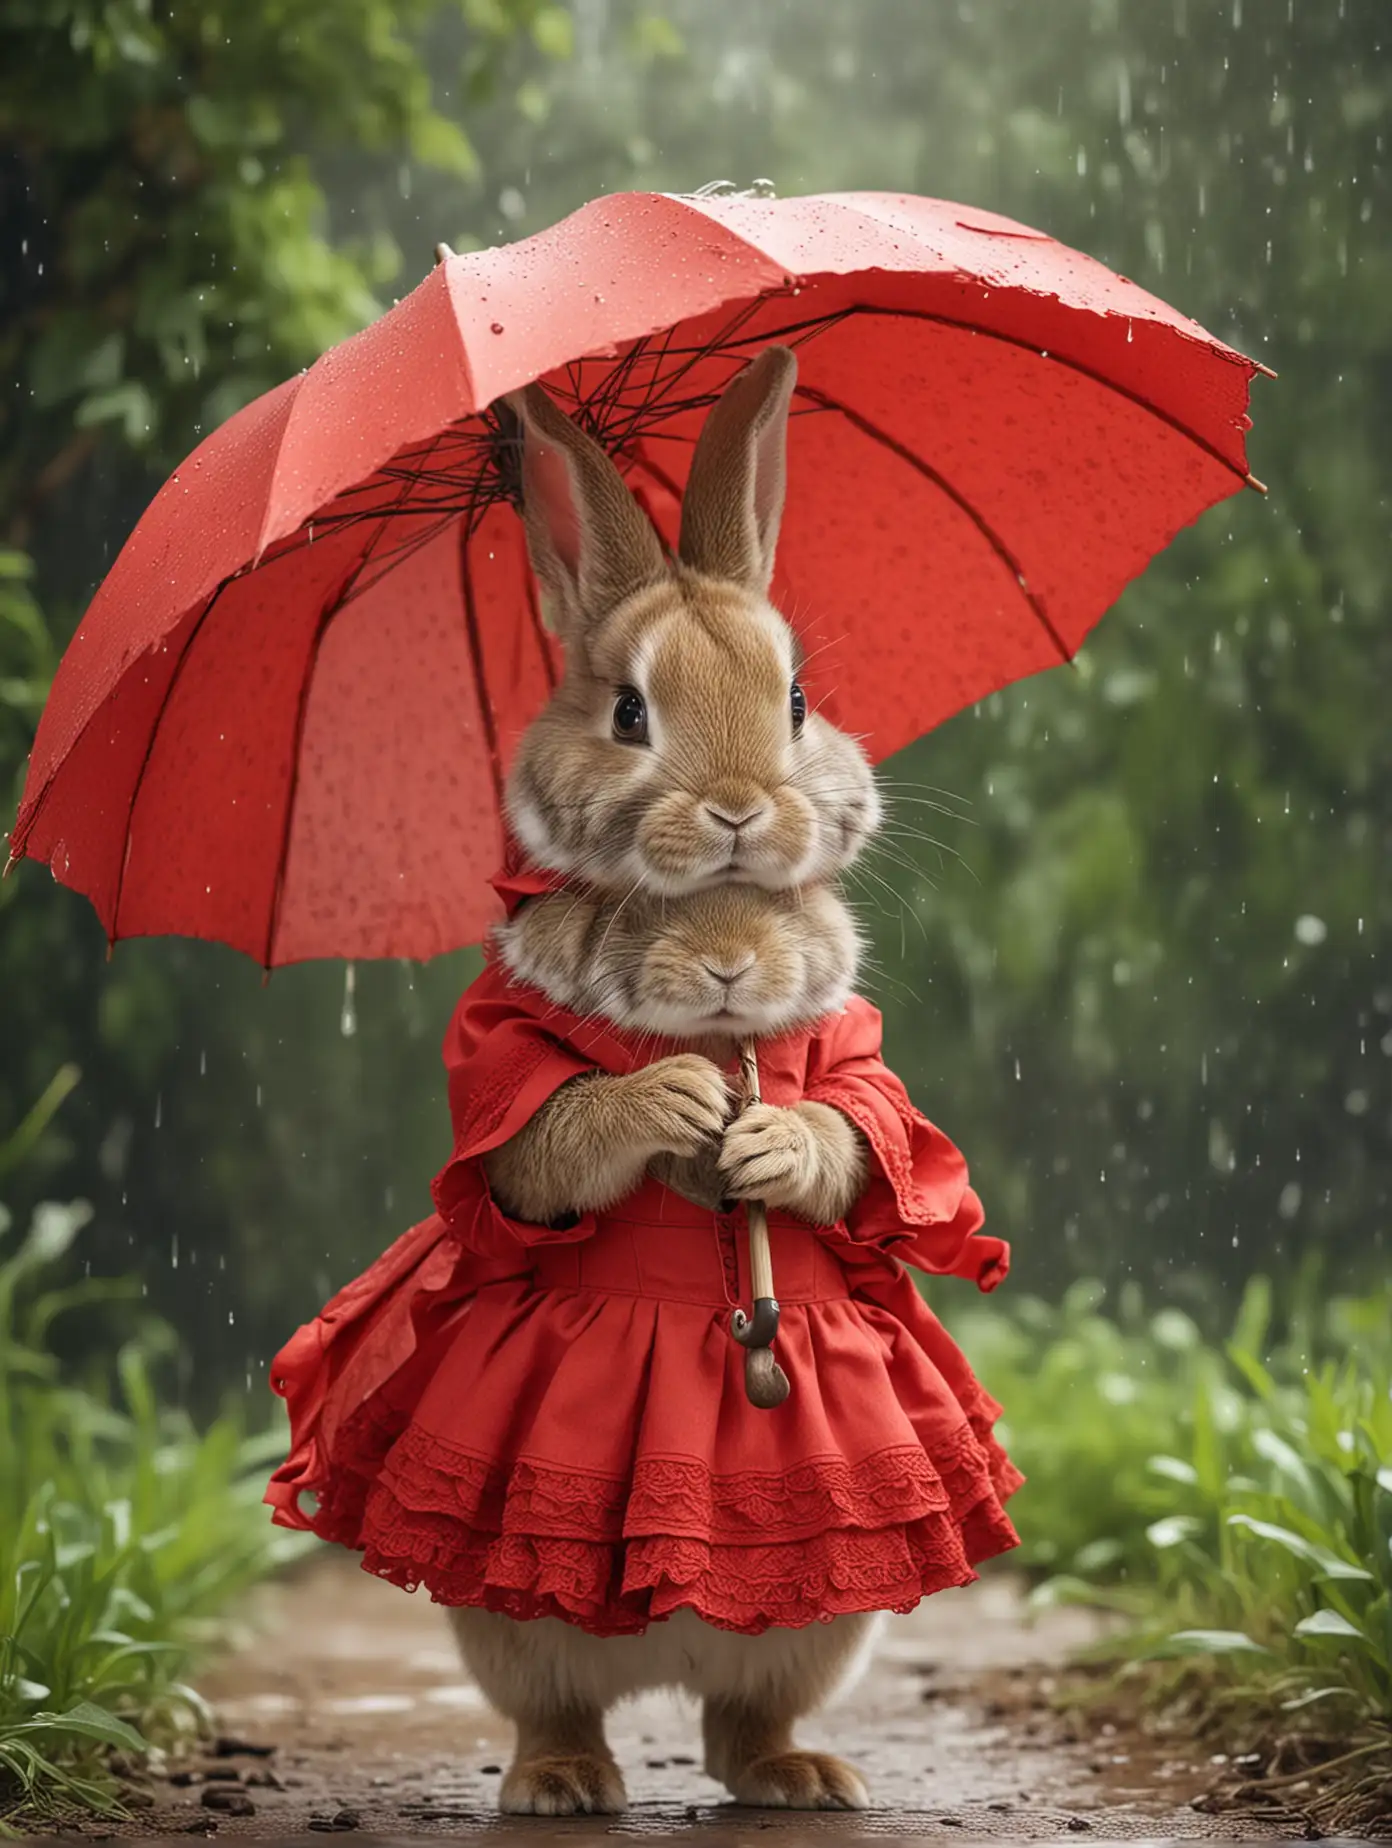 Adorable Rabbit in Red Dress with Umbrella